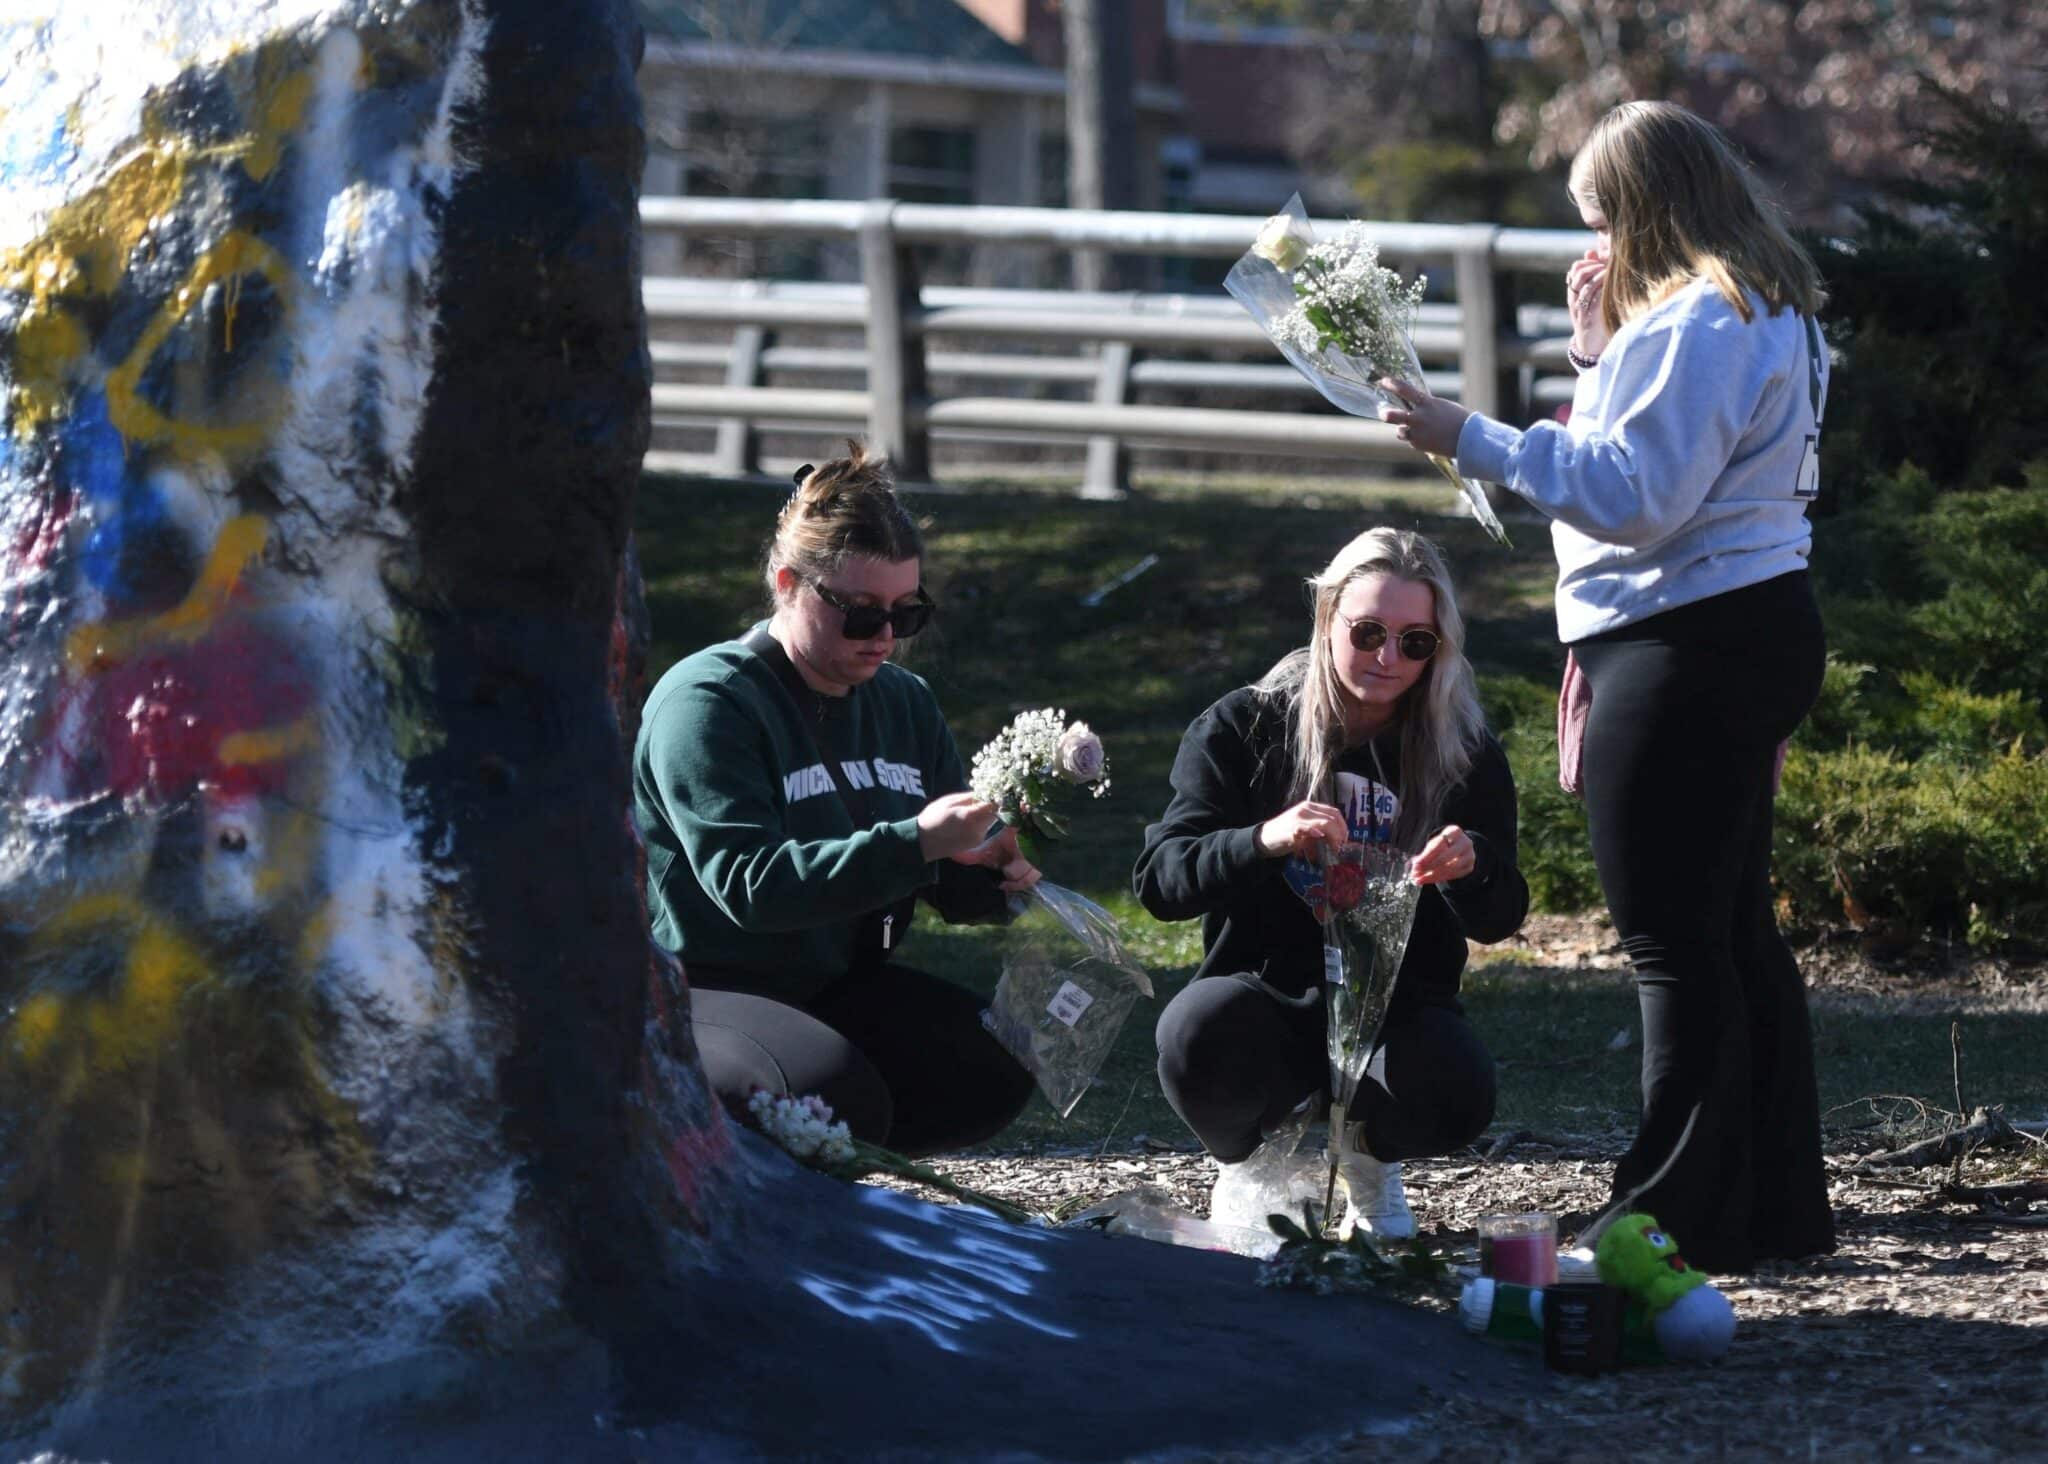 Michigan State University students place flowers at "The Rock" on campus Feb. 14, 2023, the day after after a mass shooting at the university in East Lansing. A gunman opened fire at at two university locations leaving three dead and five others critically injured. After an hourslong manhunt police found the shooter off campus dead of an apparent self-inflicted gunshot wound. (OSV News photo/Matthew Dae Smith, Lansing State Journal USA TODAY NETWORK via Reuters)